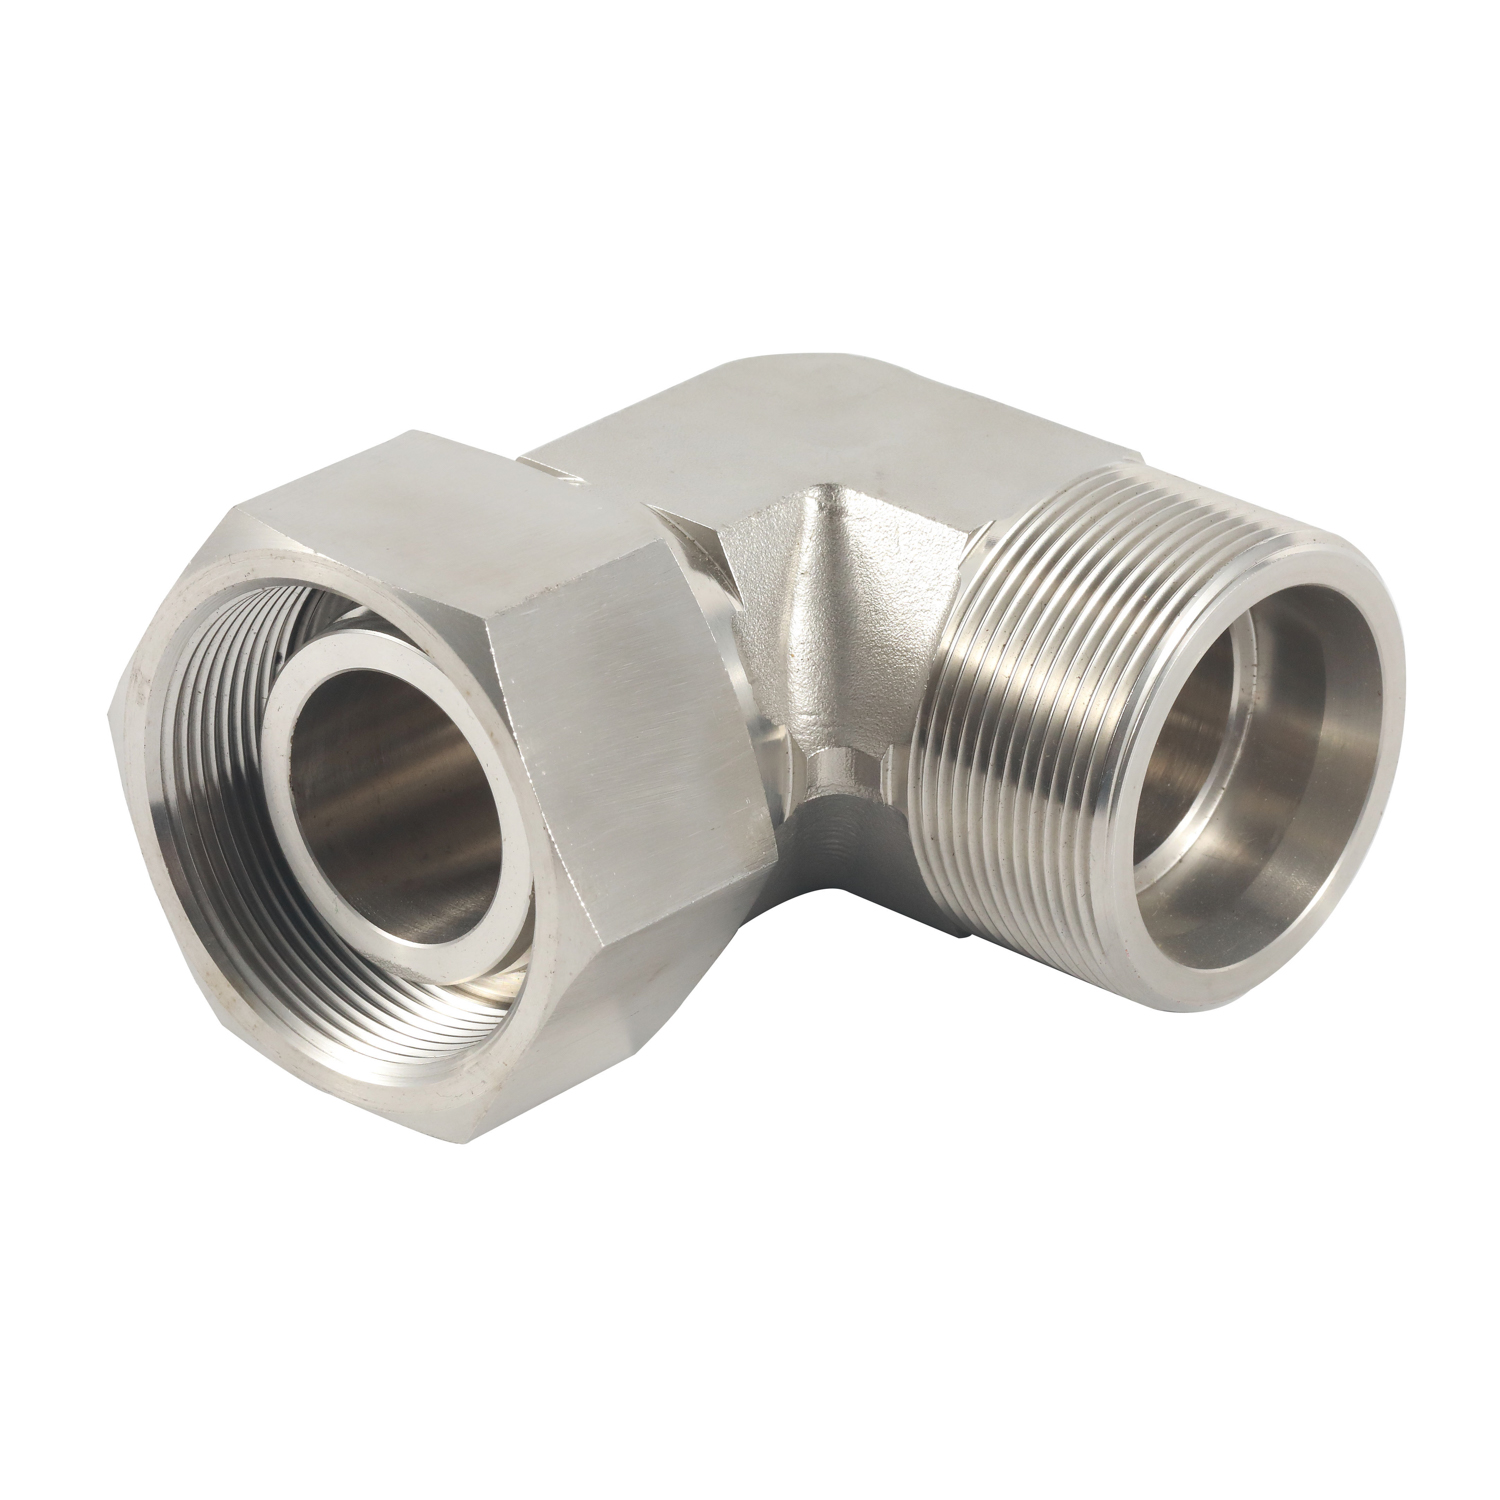 2C9 90 degree elbow reducer tube adaptor with swivel nut